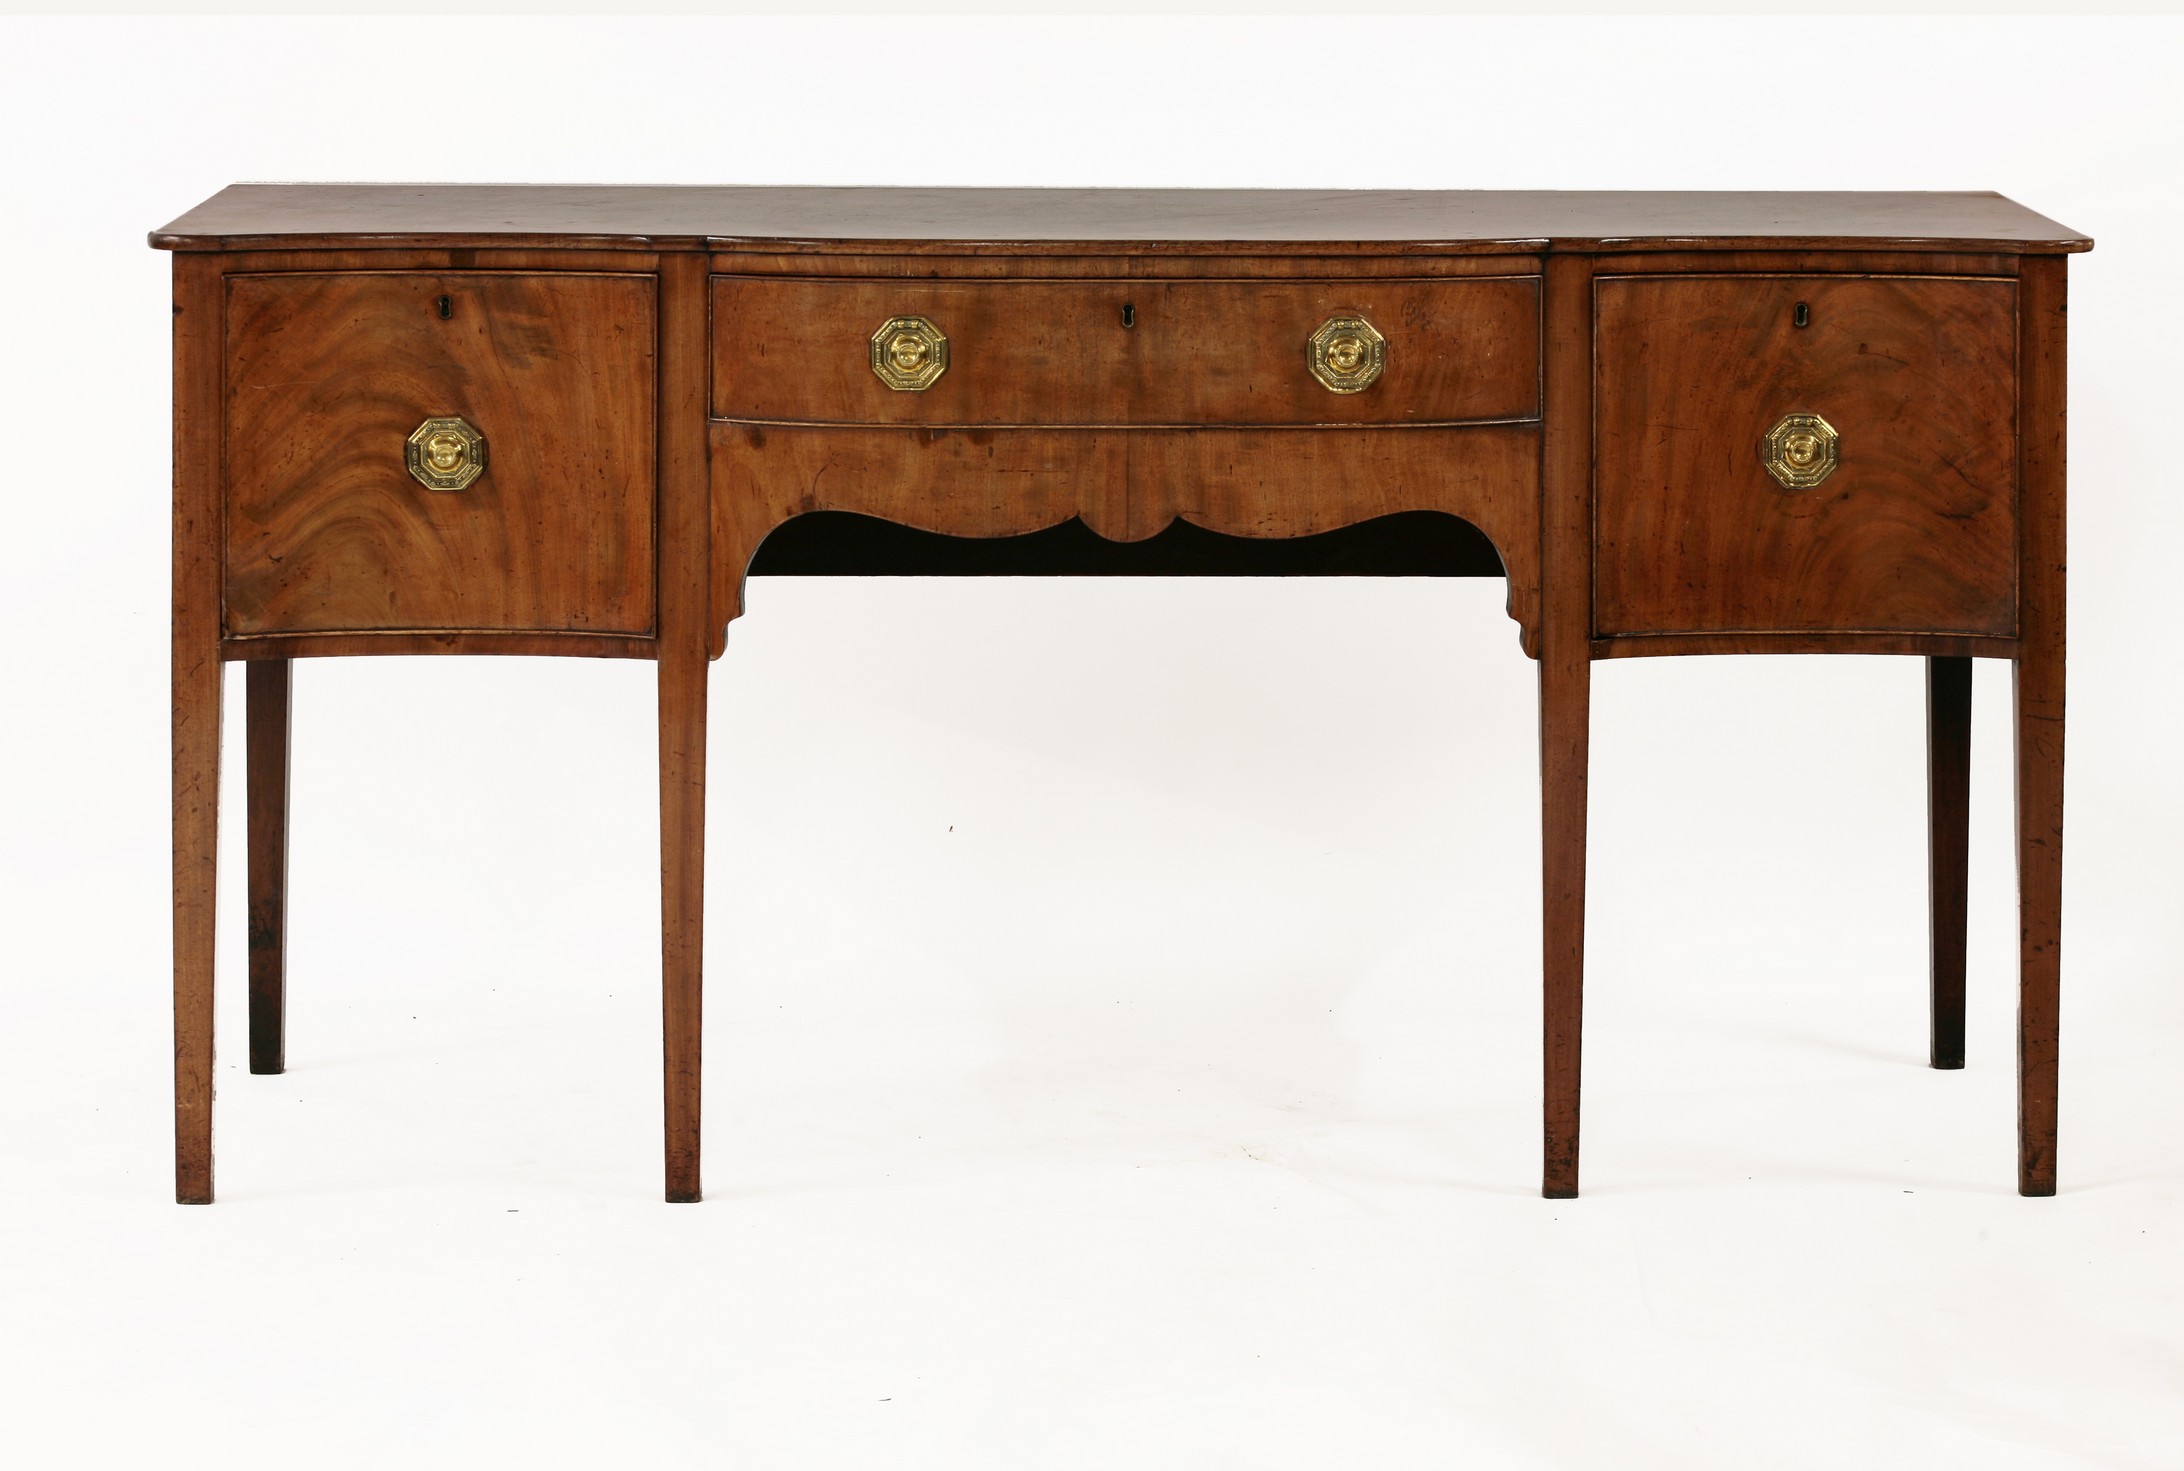 A George III mahogany serpentine fronted sideboard,
with bow front central drawer flanked by two